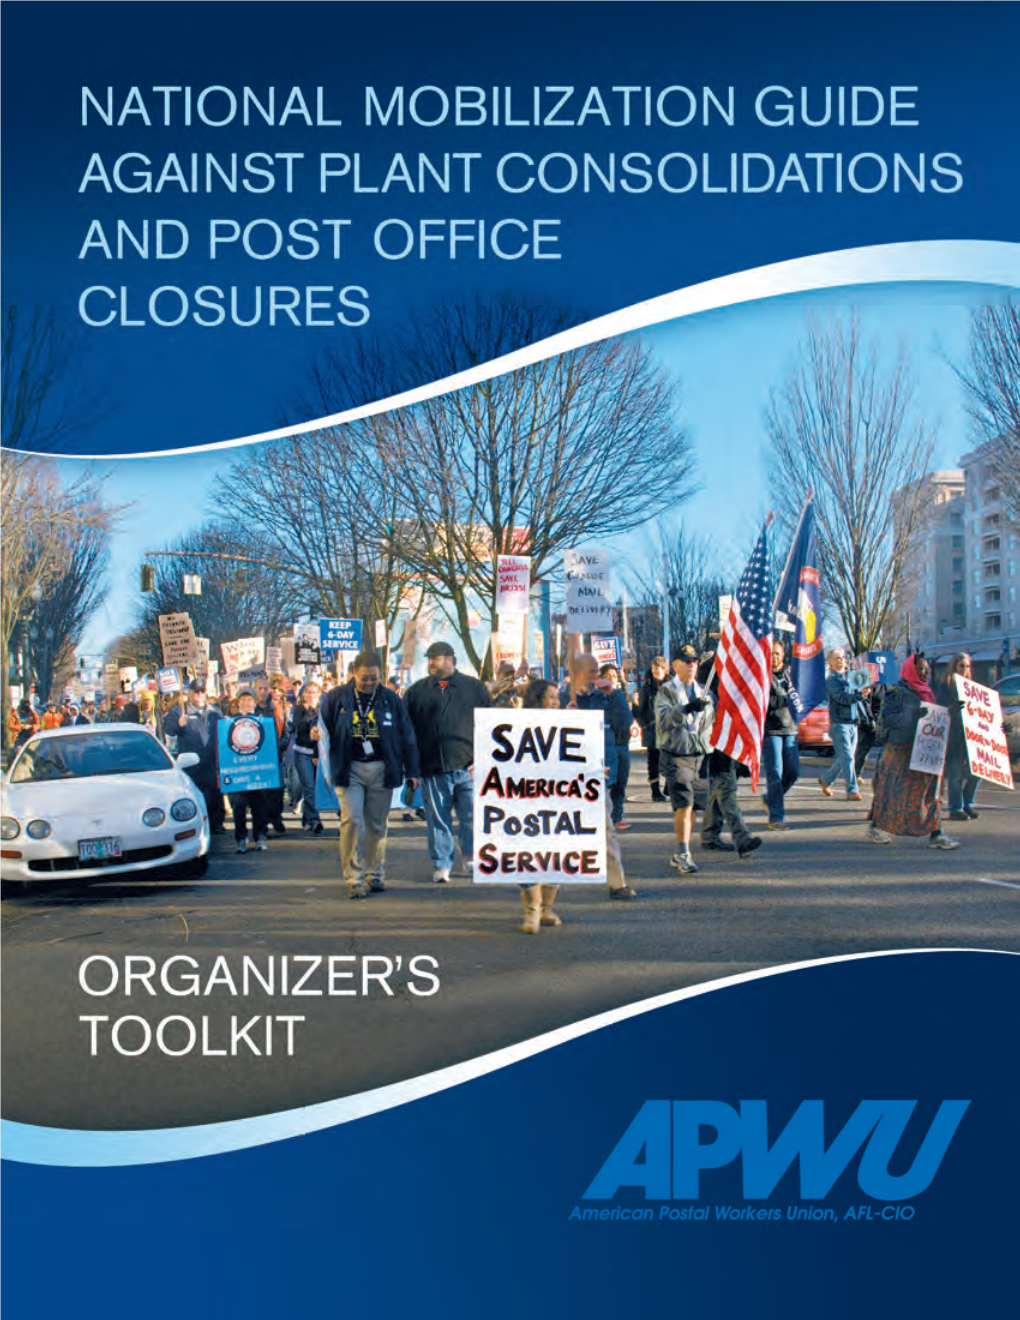 Mobilization Guide Against USPS Consolidations and Closures